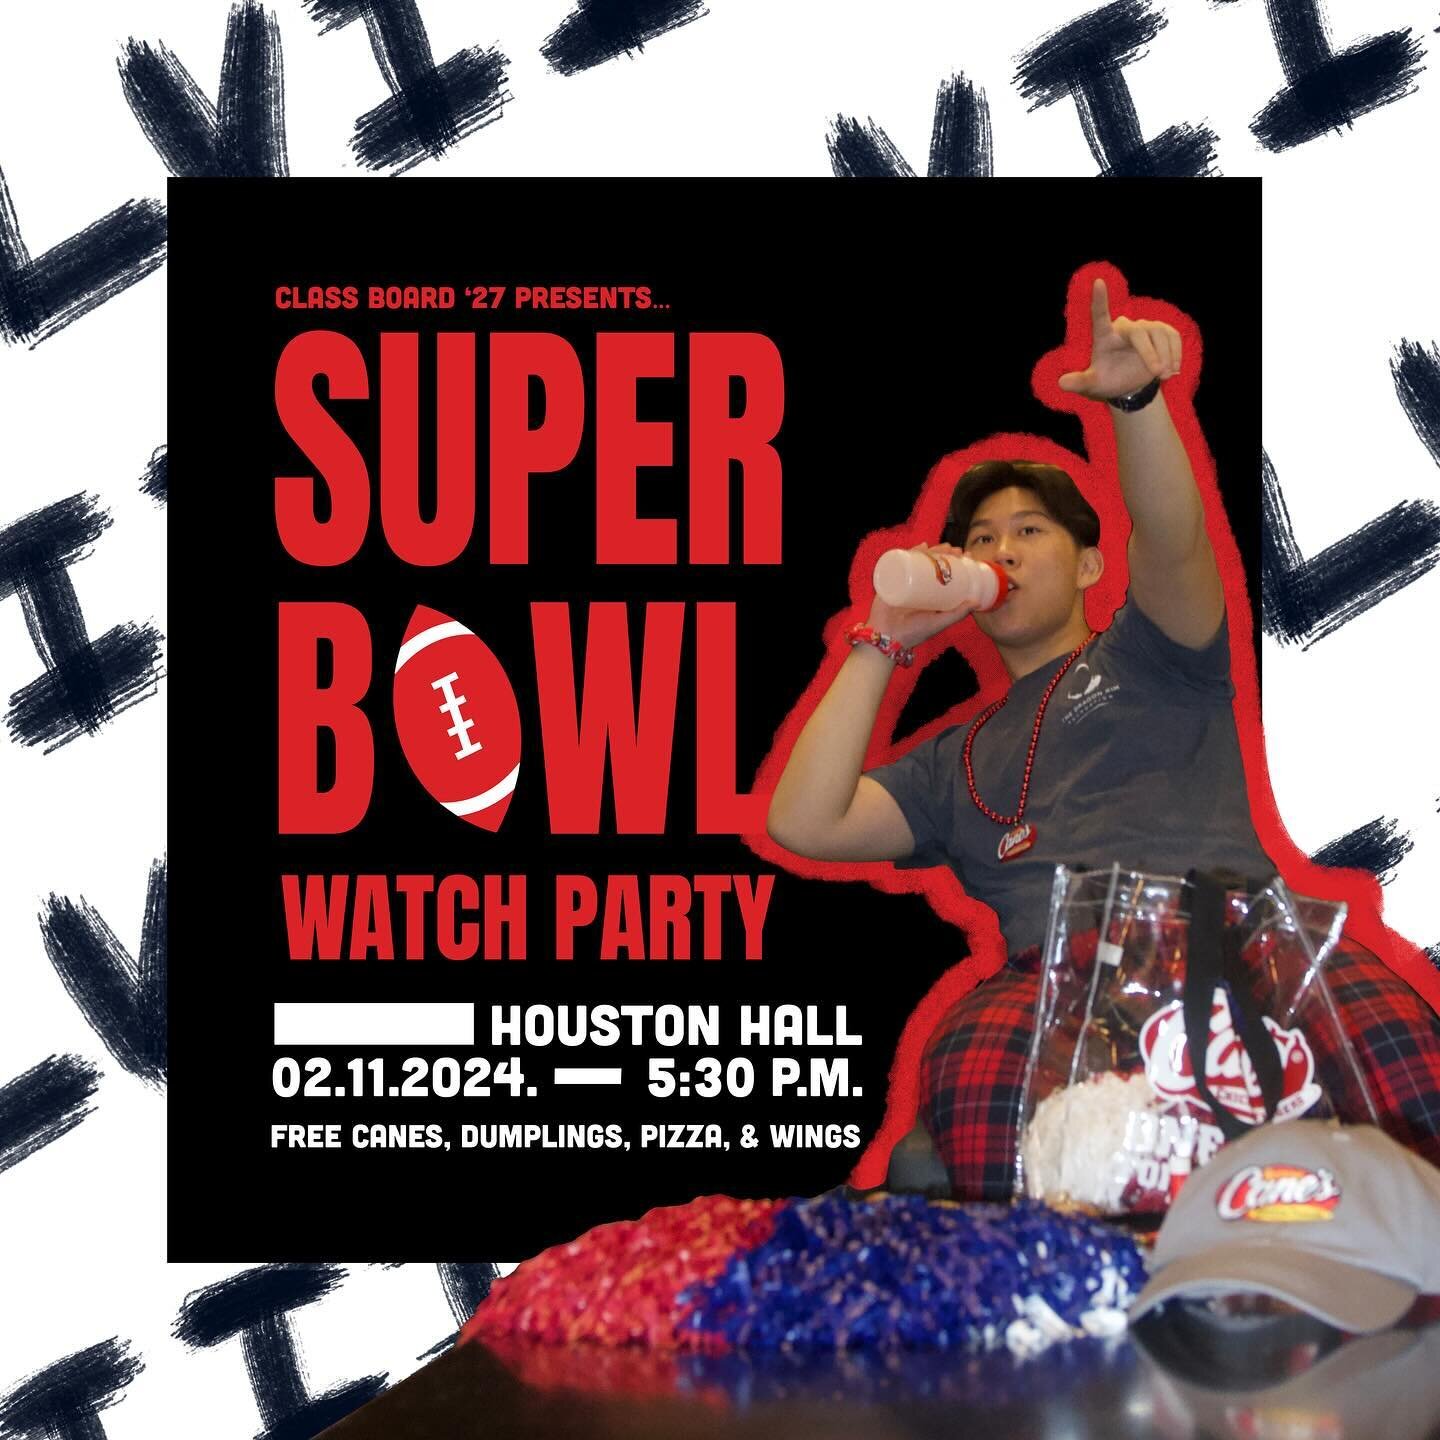 🏈 SUPERBOWL WATCH PARTY 🏈 | Sun, Feb 11th @ Houston Hall

Pull up to Houston Hall this Sunday at 5:30 p.m. to join us as we watch the Super Bowl. From free Canes to dumplings, pizza, and wings, we&rsquo;ve got you covered for game time.

How to win